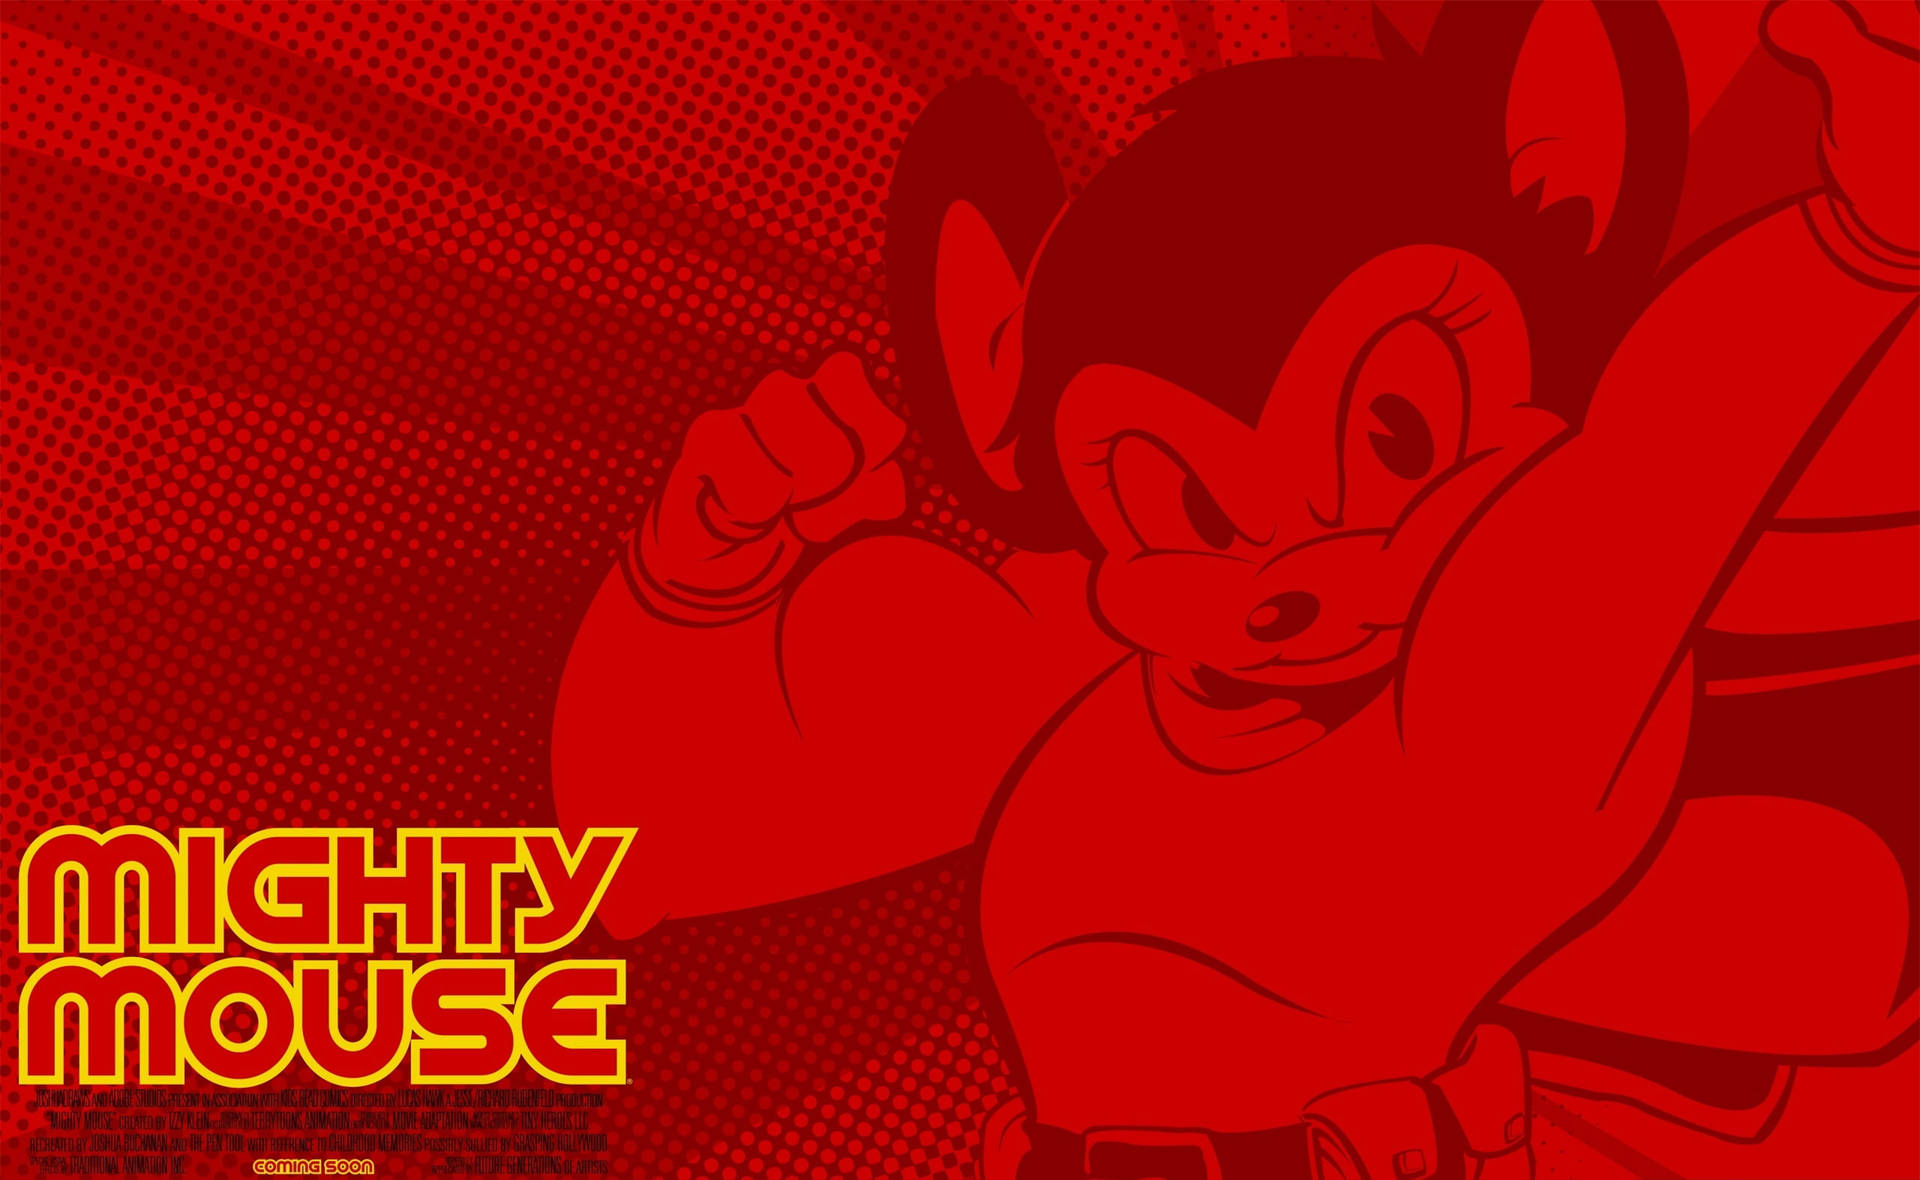 Mighty Mouse Red Poster Wallpaper